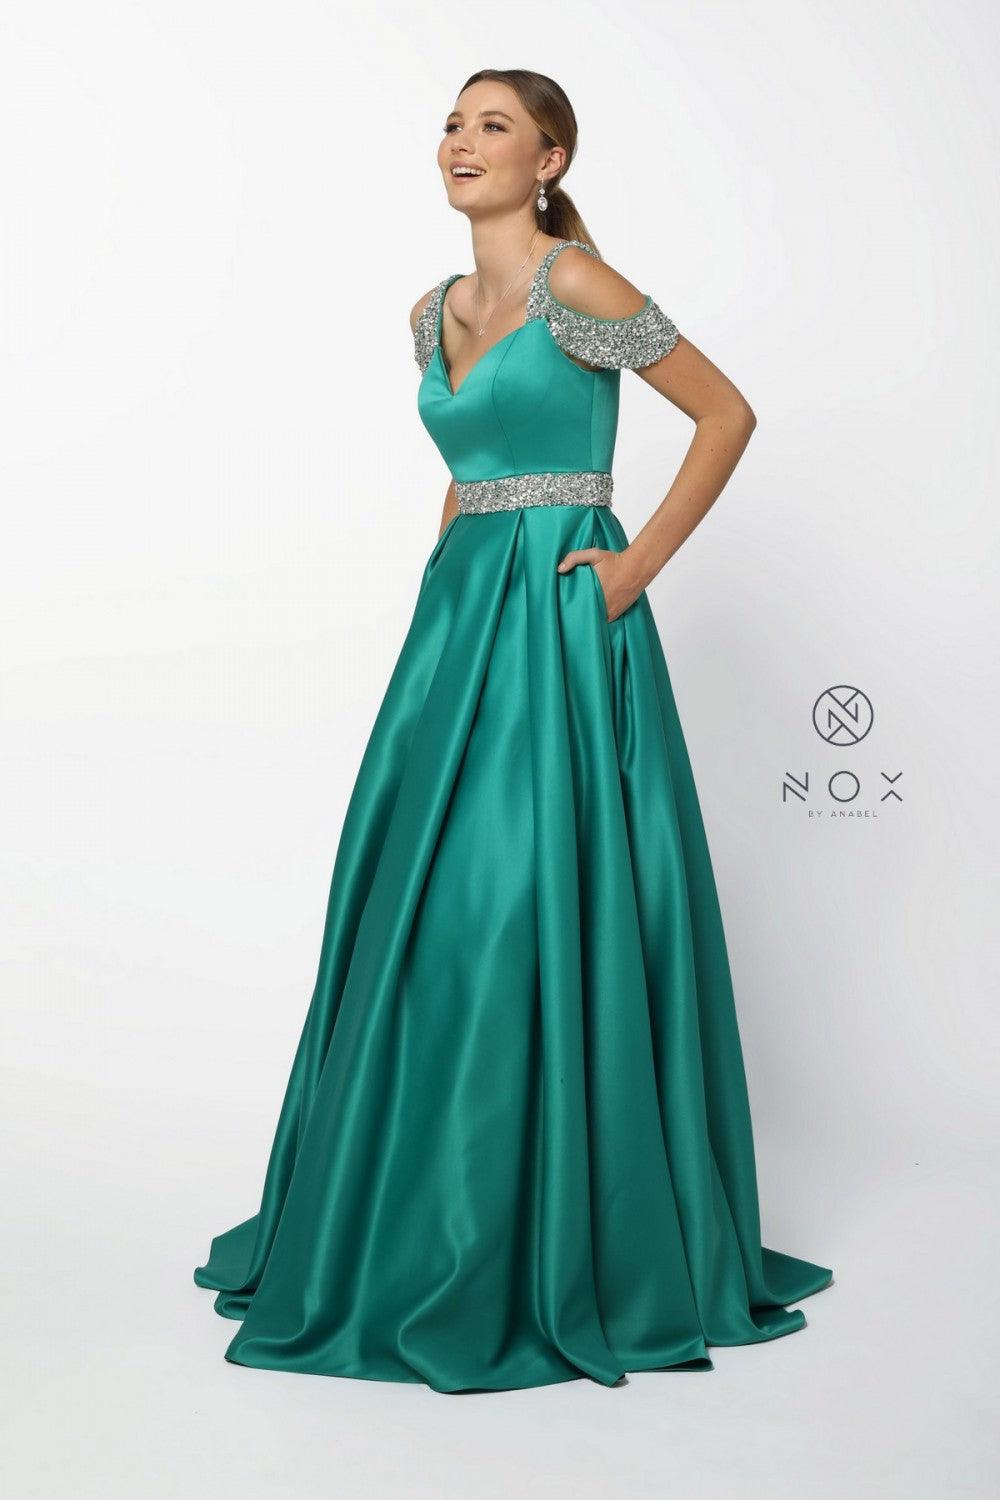 Long Prom Dress Off Shoulder Evening Gown - The Dress Outlet Nox Anabel